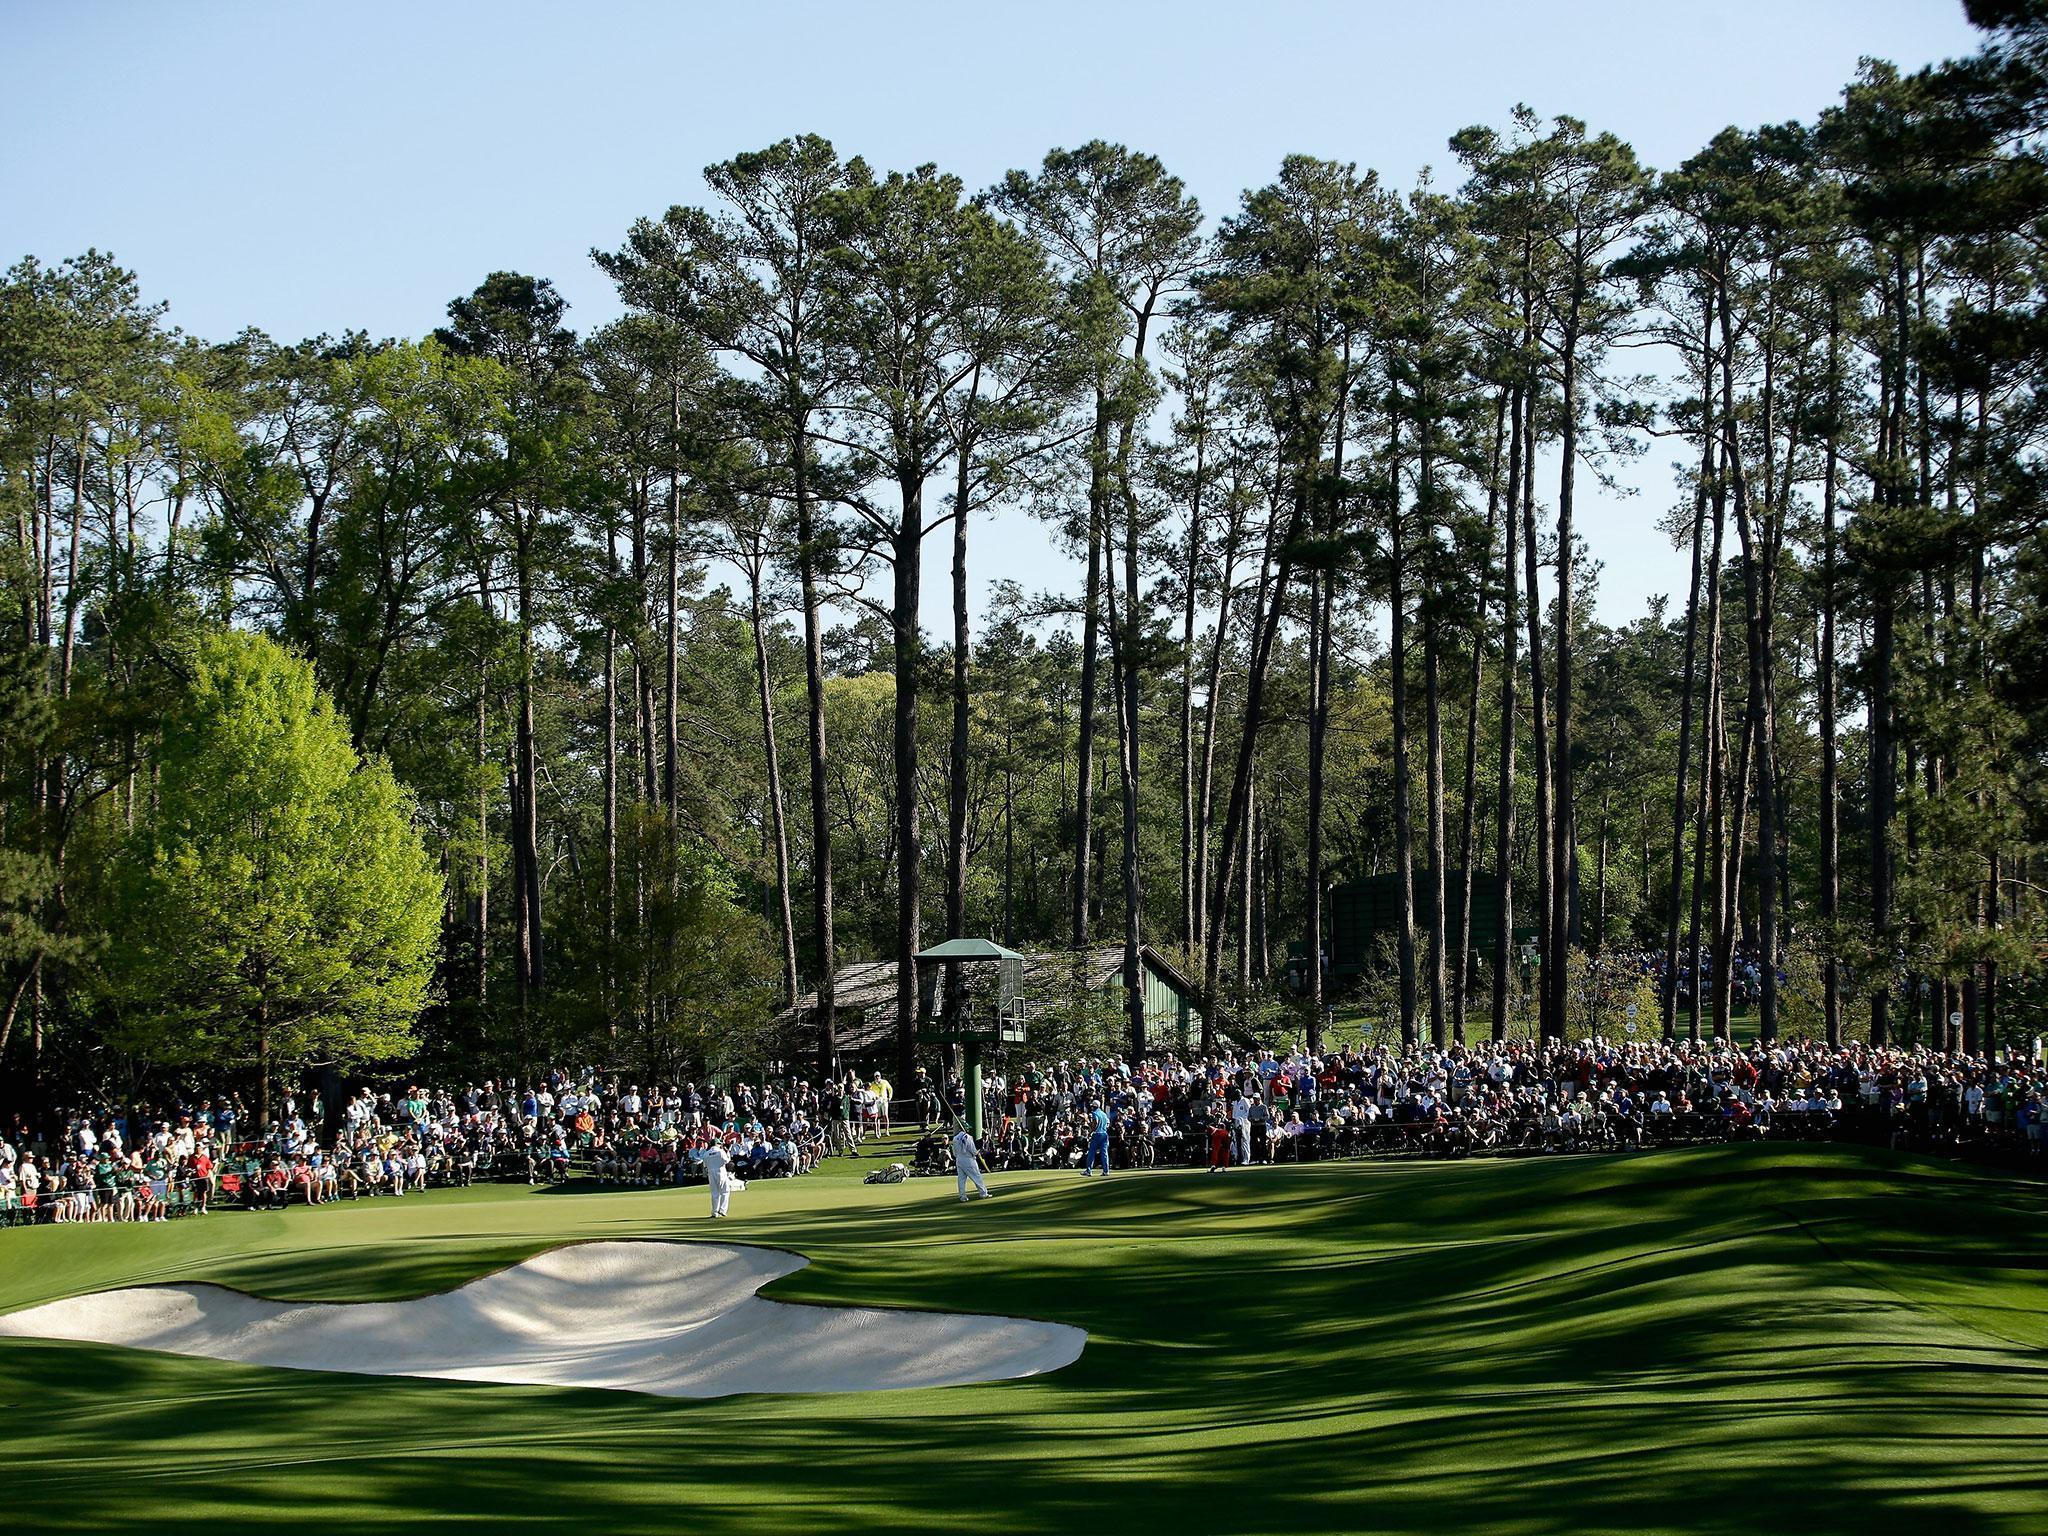 A great spectator hole as Augusta patrons can watch the entire hole tee to green without moving